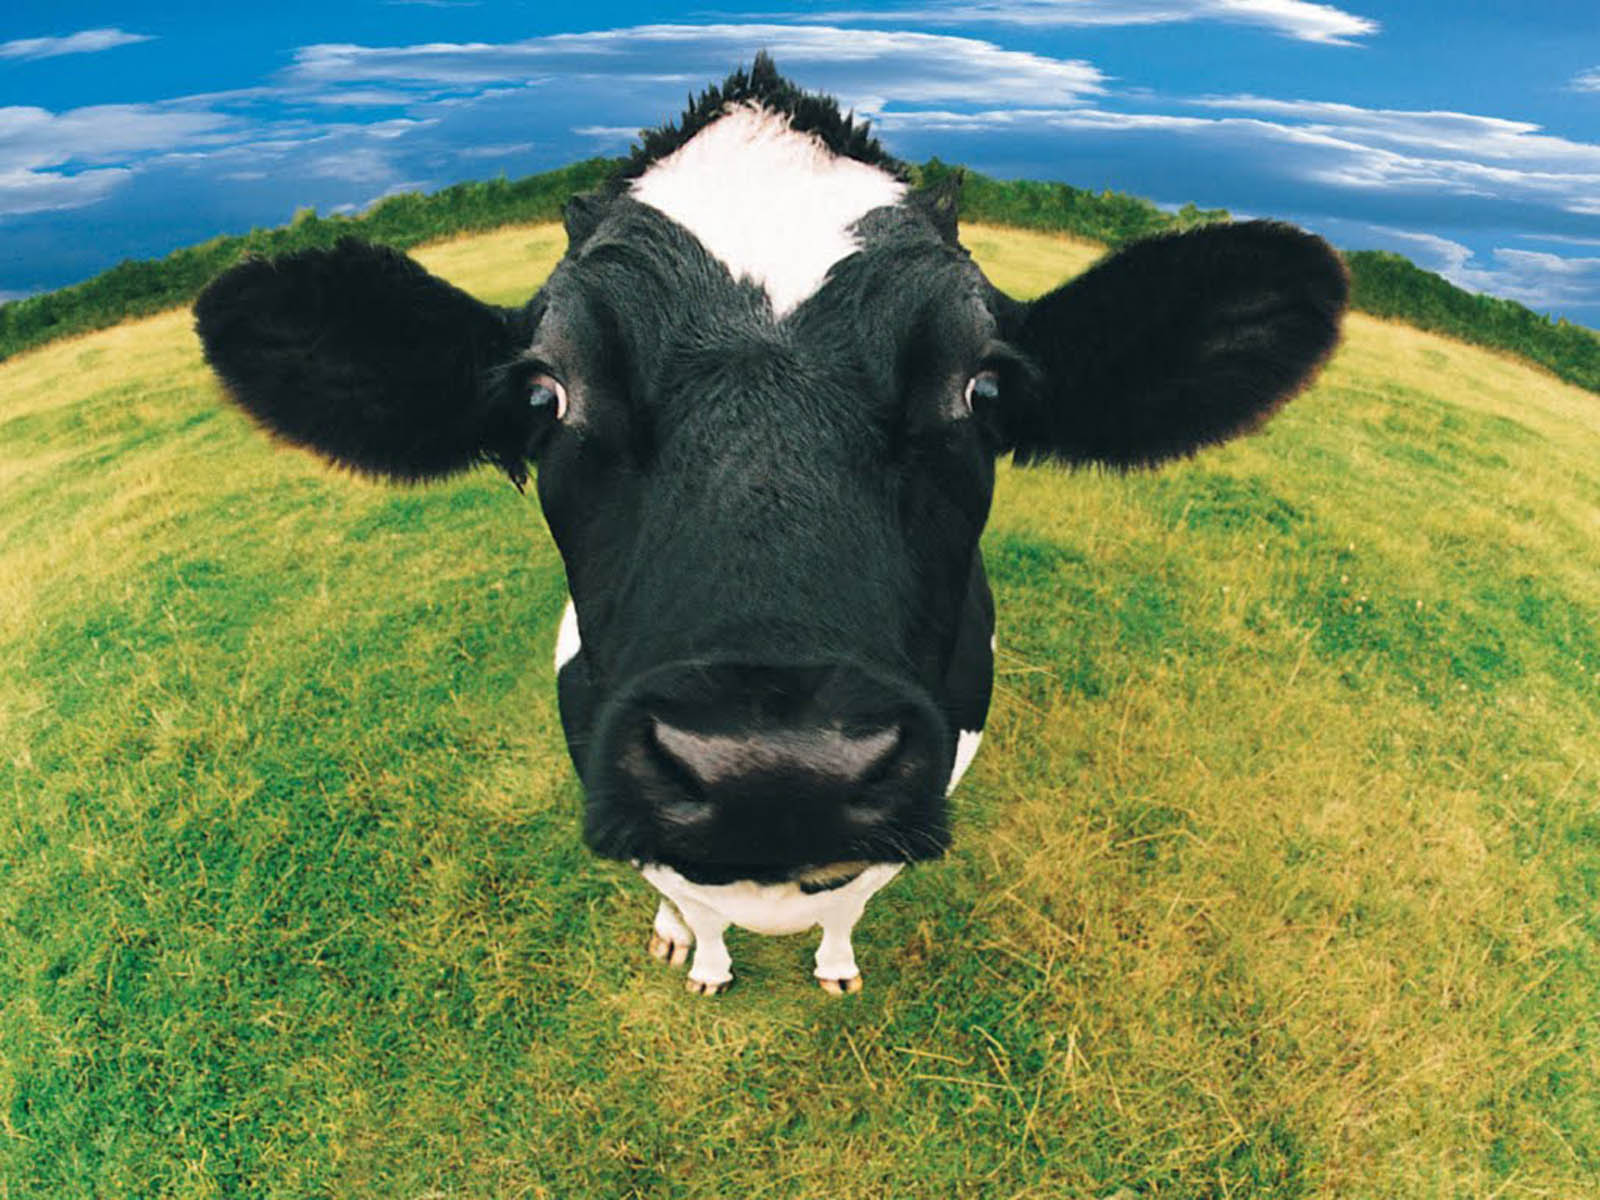  Farm Animals Wallpapers Images Photos Pictures and Backgrounds for